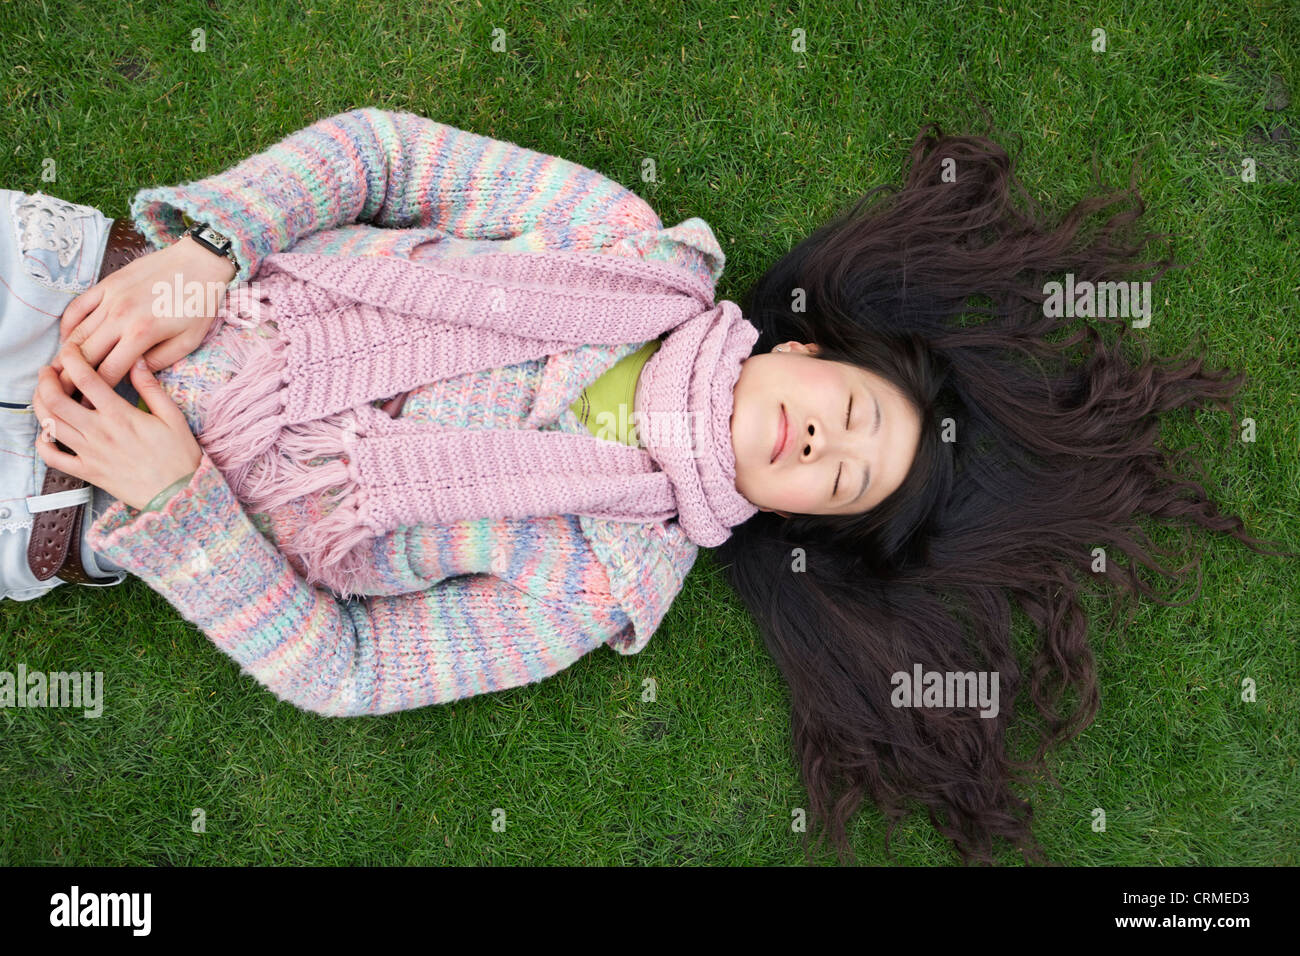 Top view of young Asian woman with long black hair lying on lawn Stock Photo